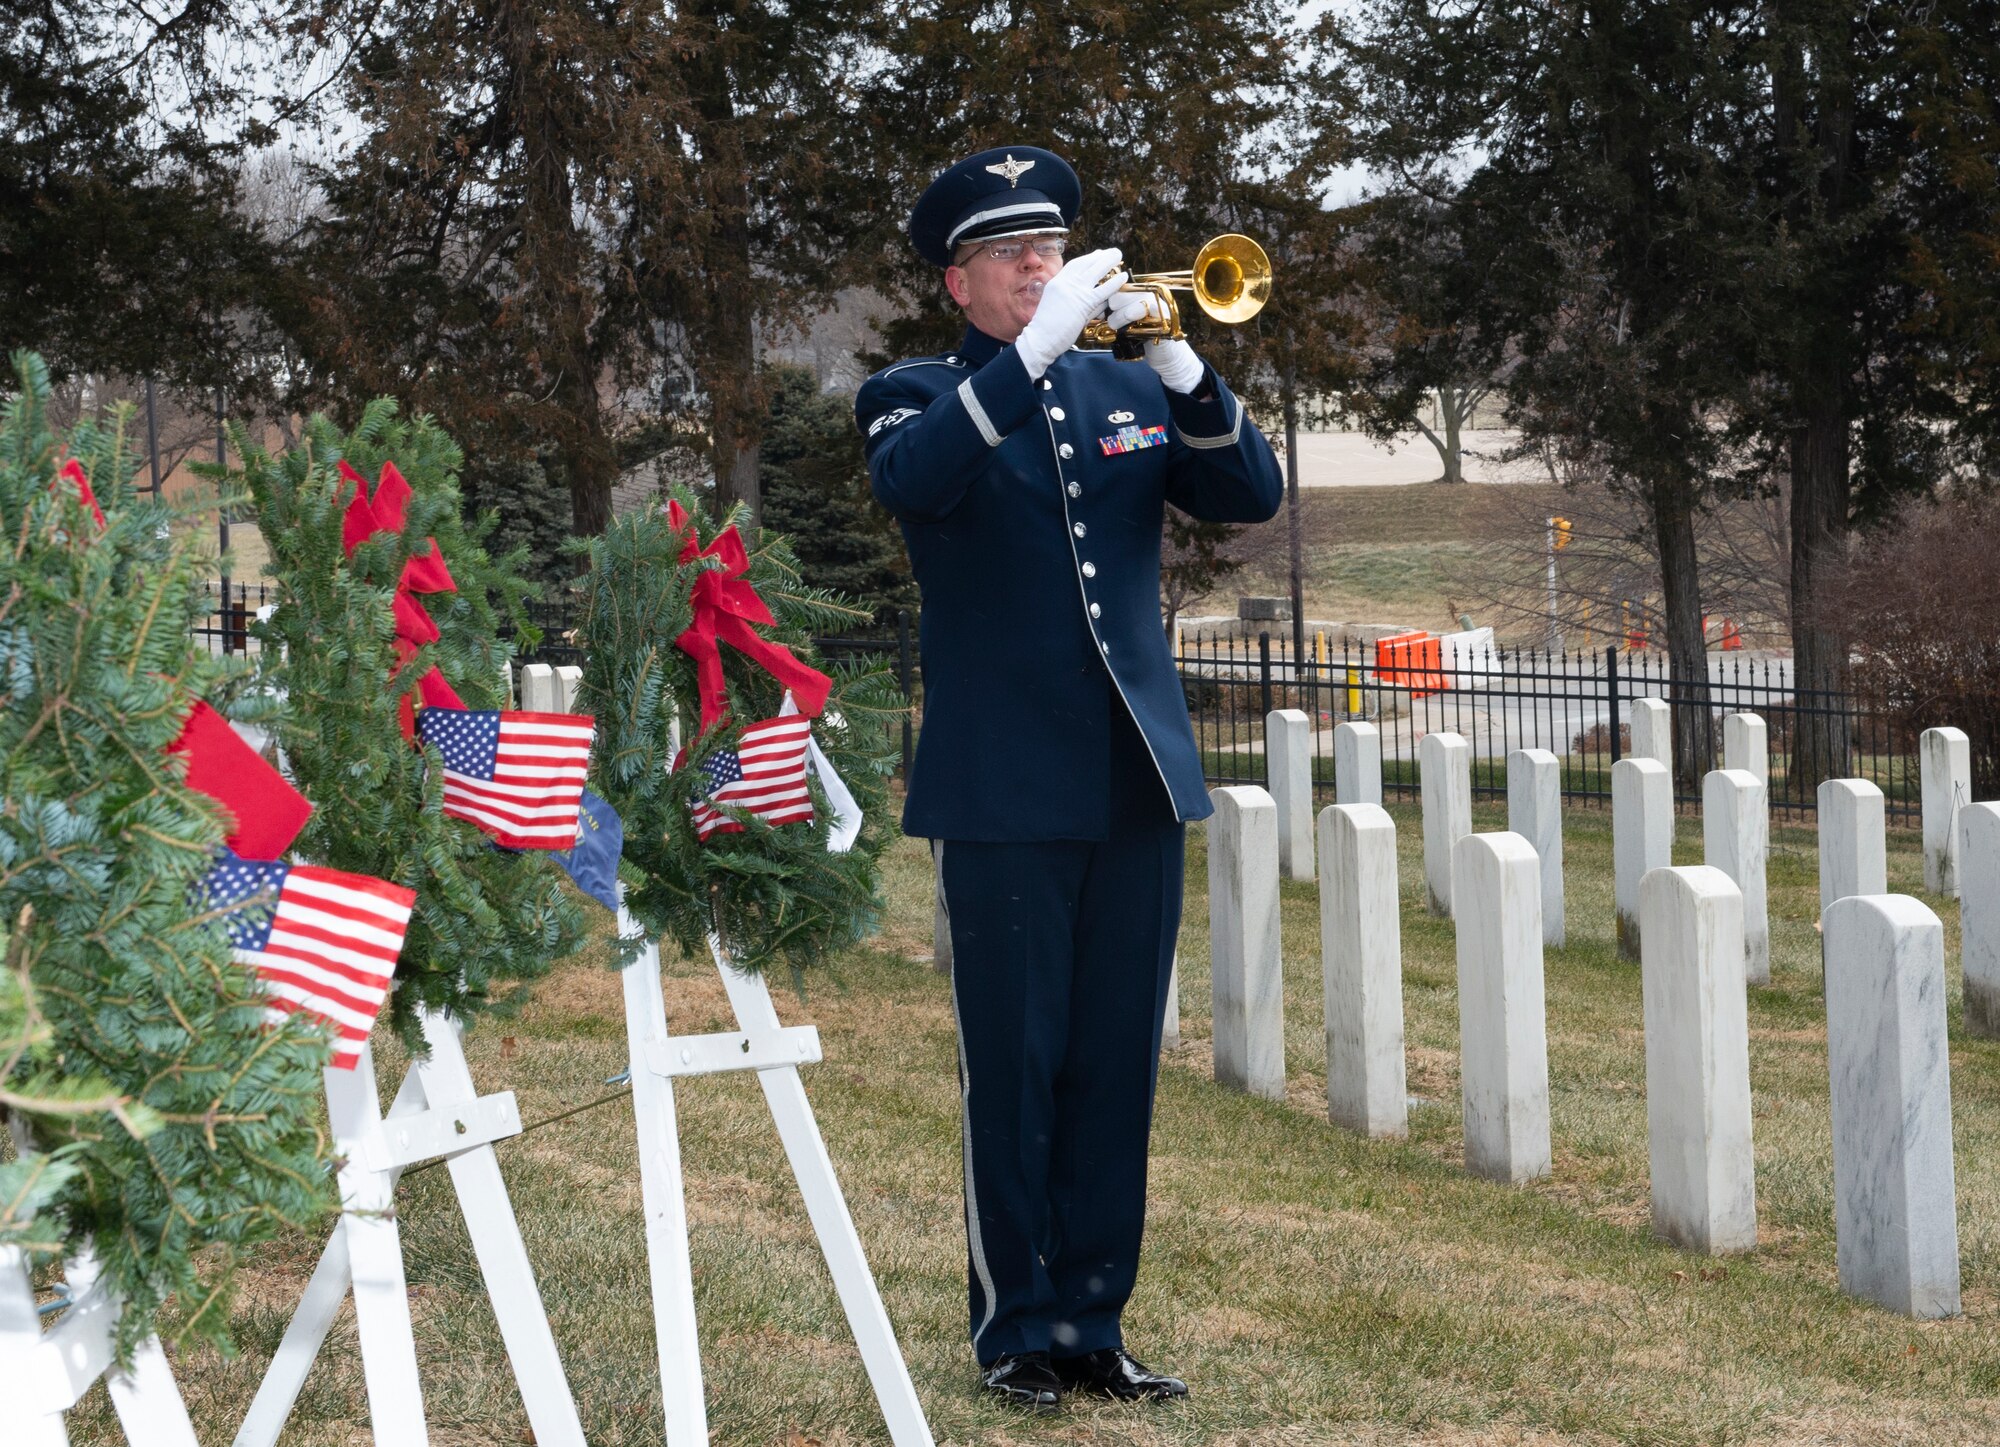 airmen in uniform standing in the middle of wreaths on easels and the first row of headstones at a cemetery